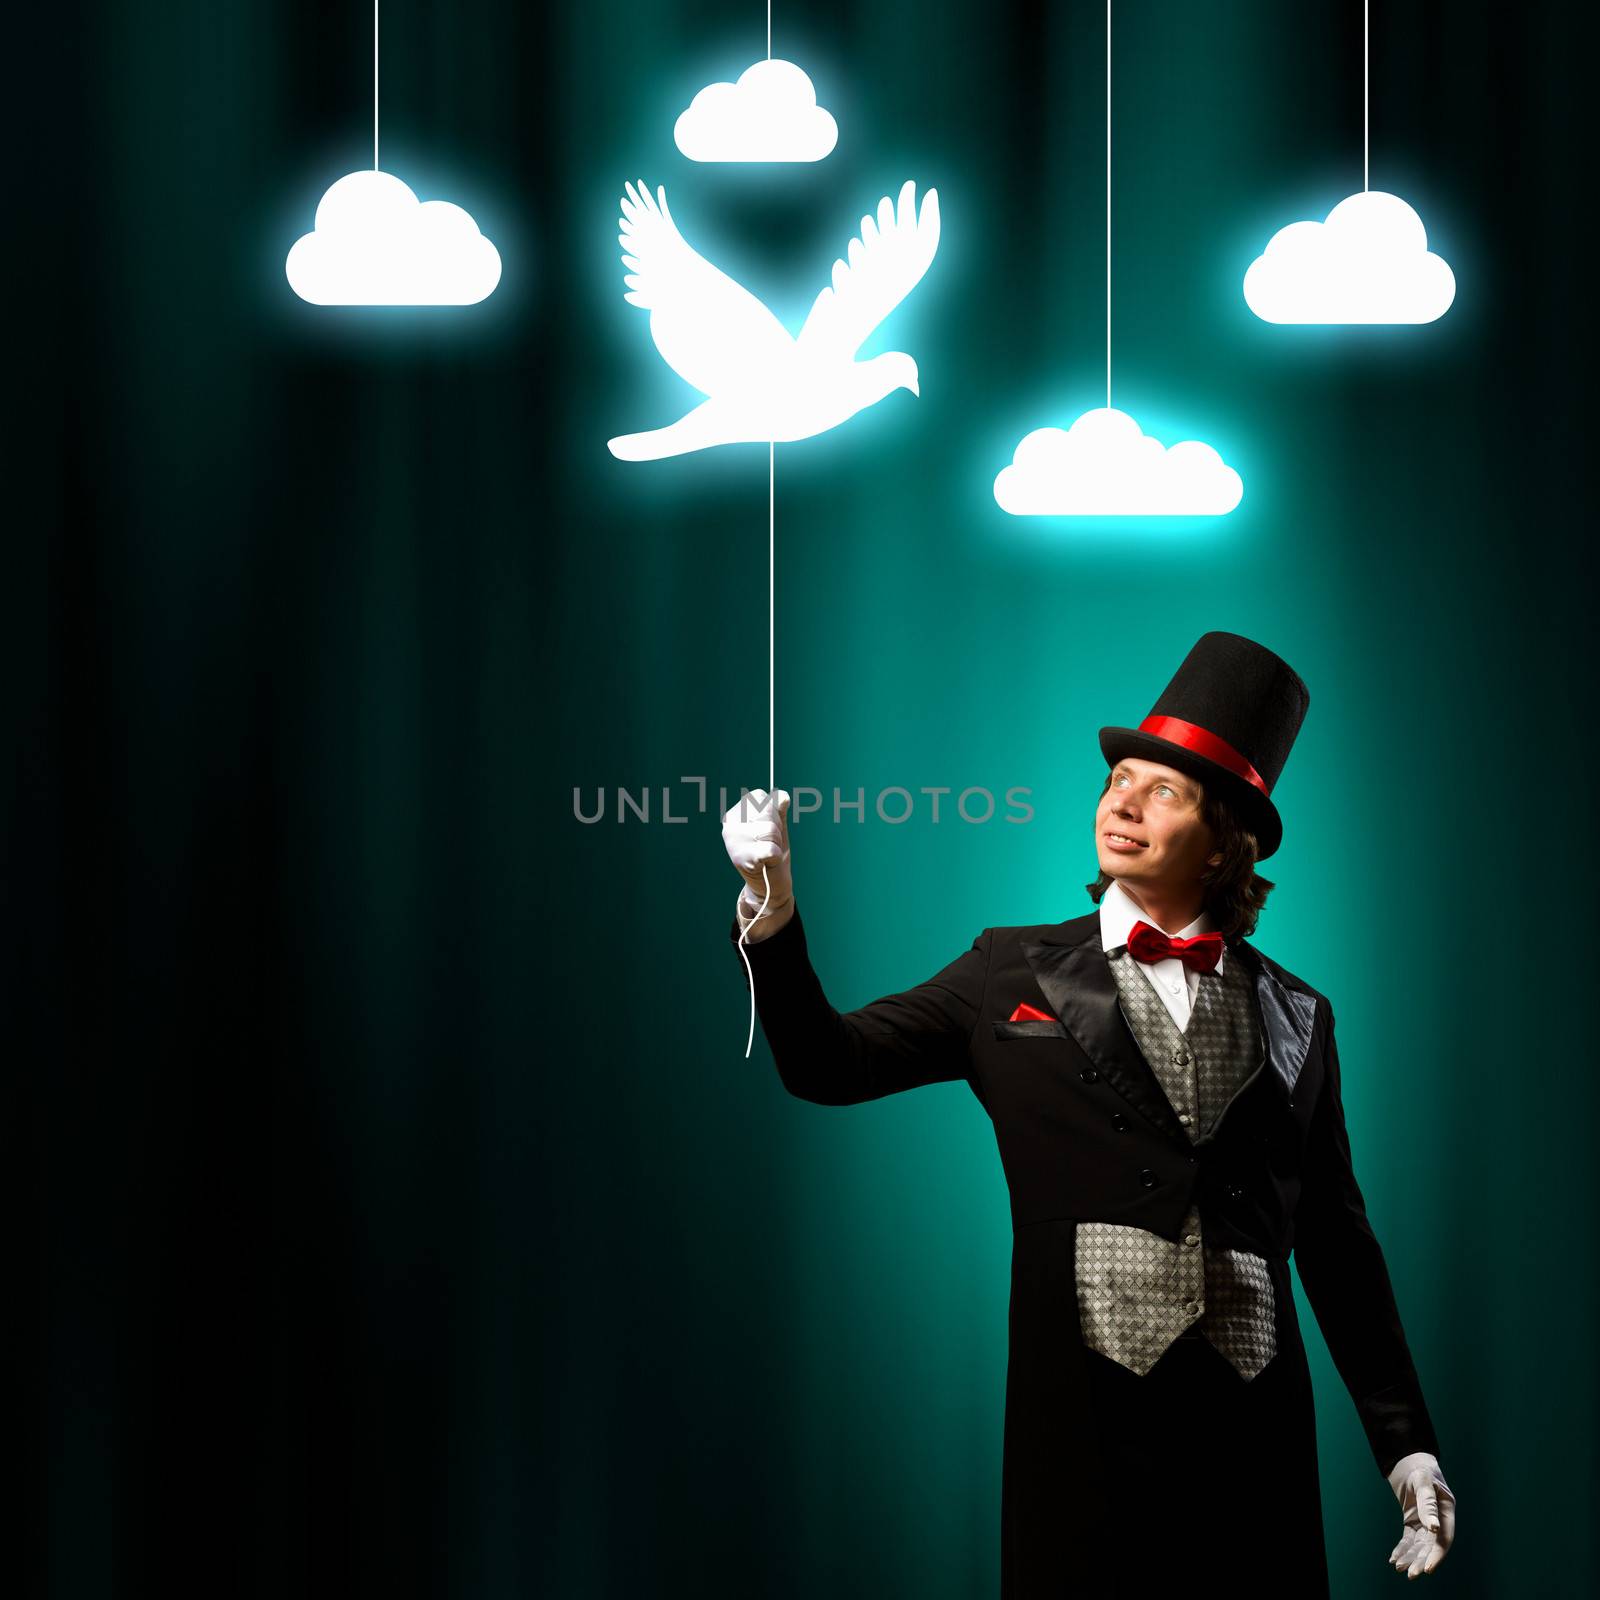 Magician in hat by sergey_nivens